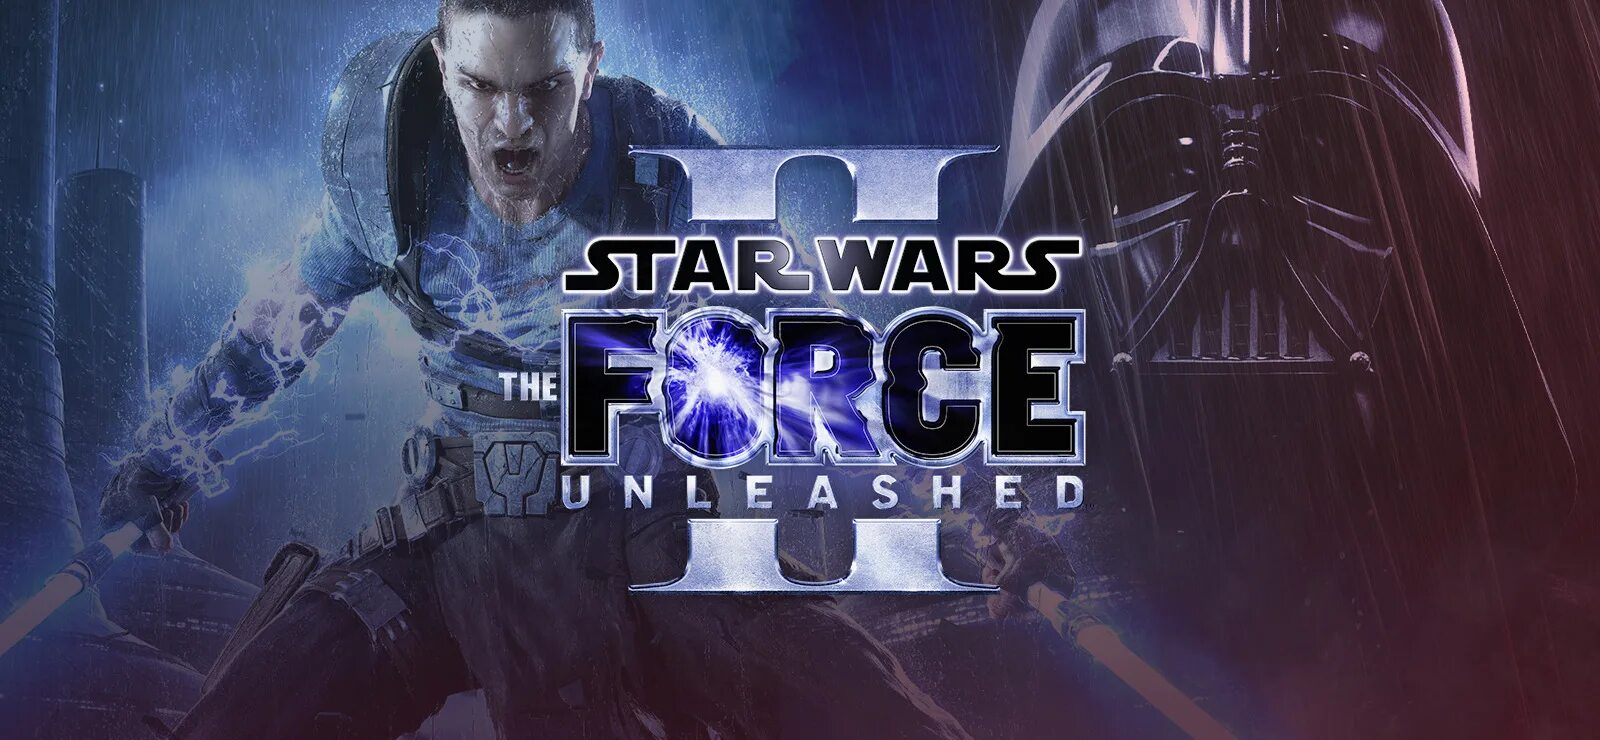 Star wars the force unleashed коды. Star Wars the Force unleashed 2. Star Wars the Force unleashed 2 обложка. Star Wars the Force unleashed 2 Старкиллер. Star Wars the Force unleashed 1.